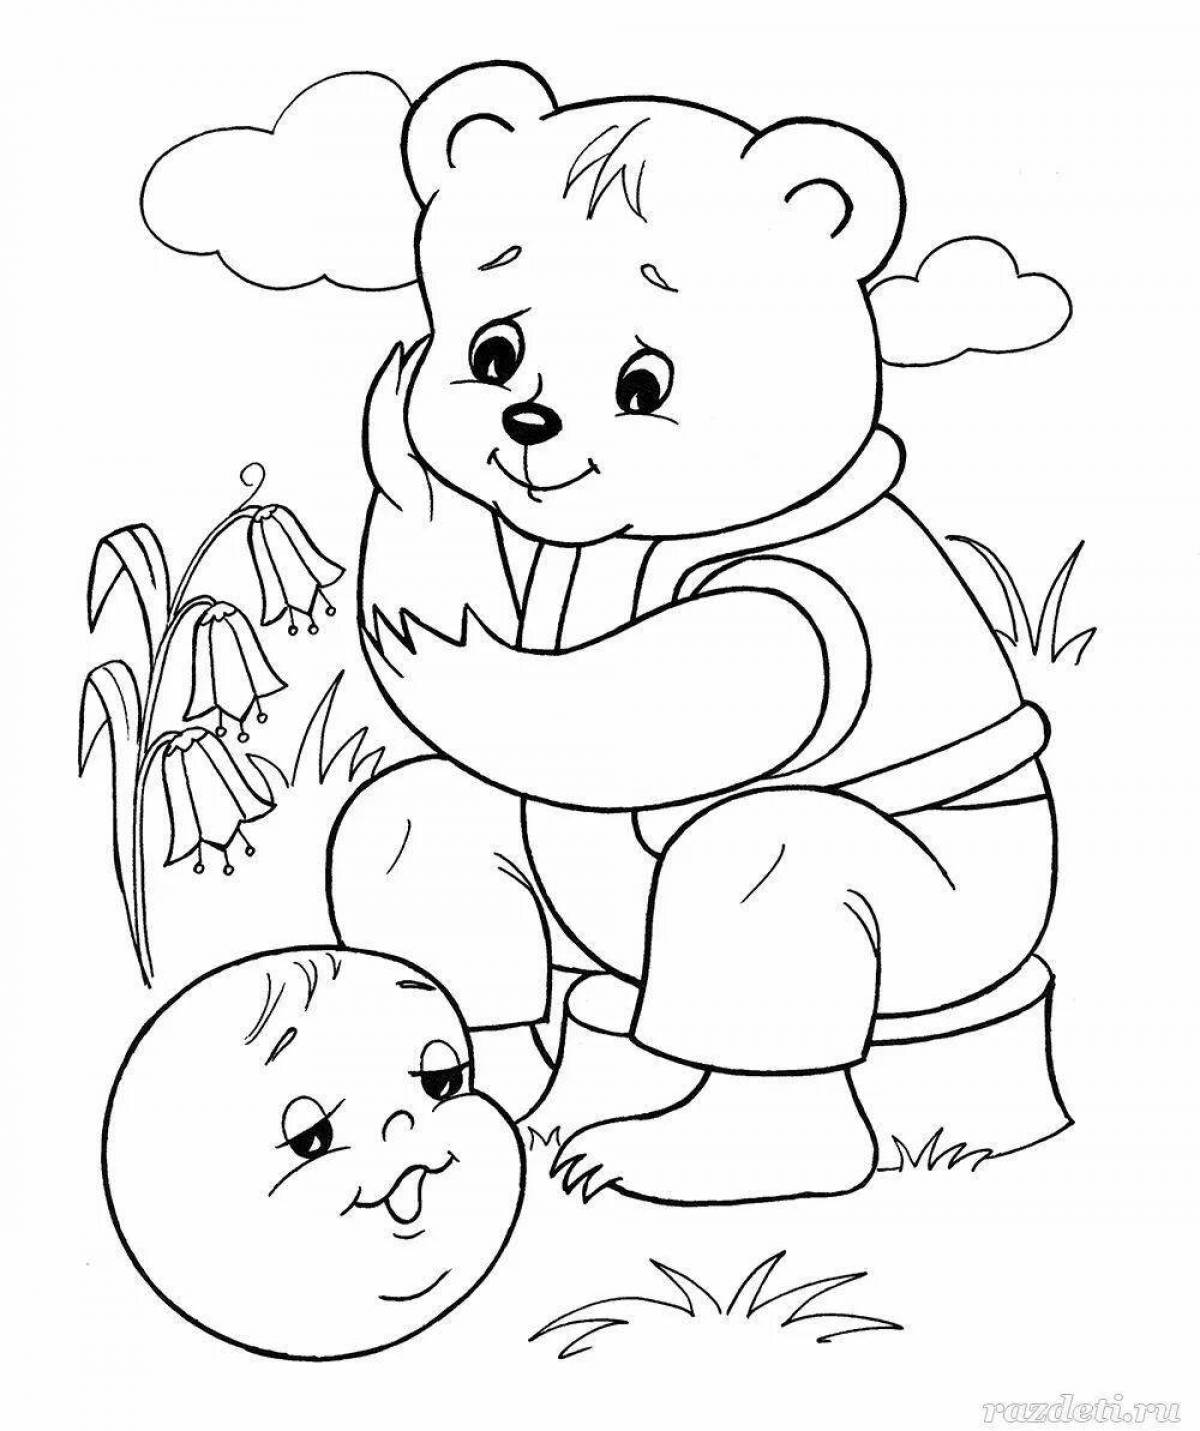 Coloring page charming gingerbread man